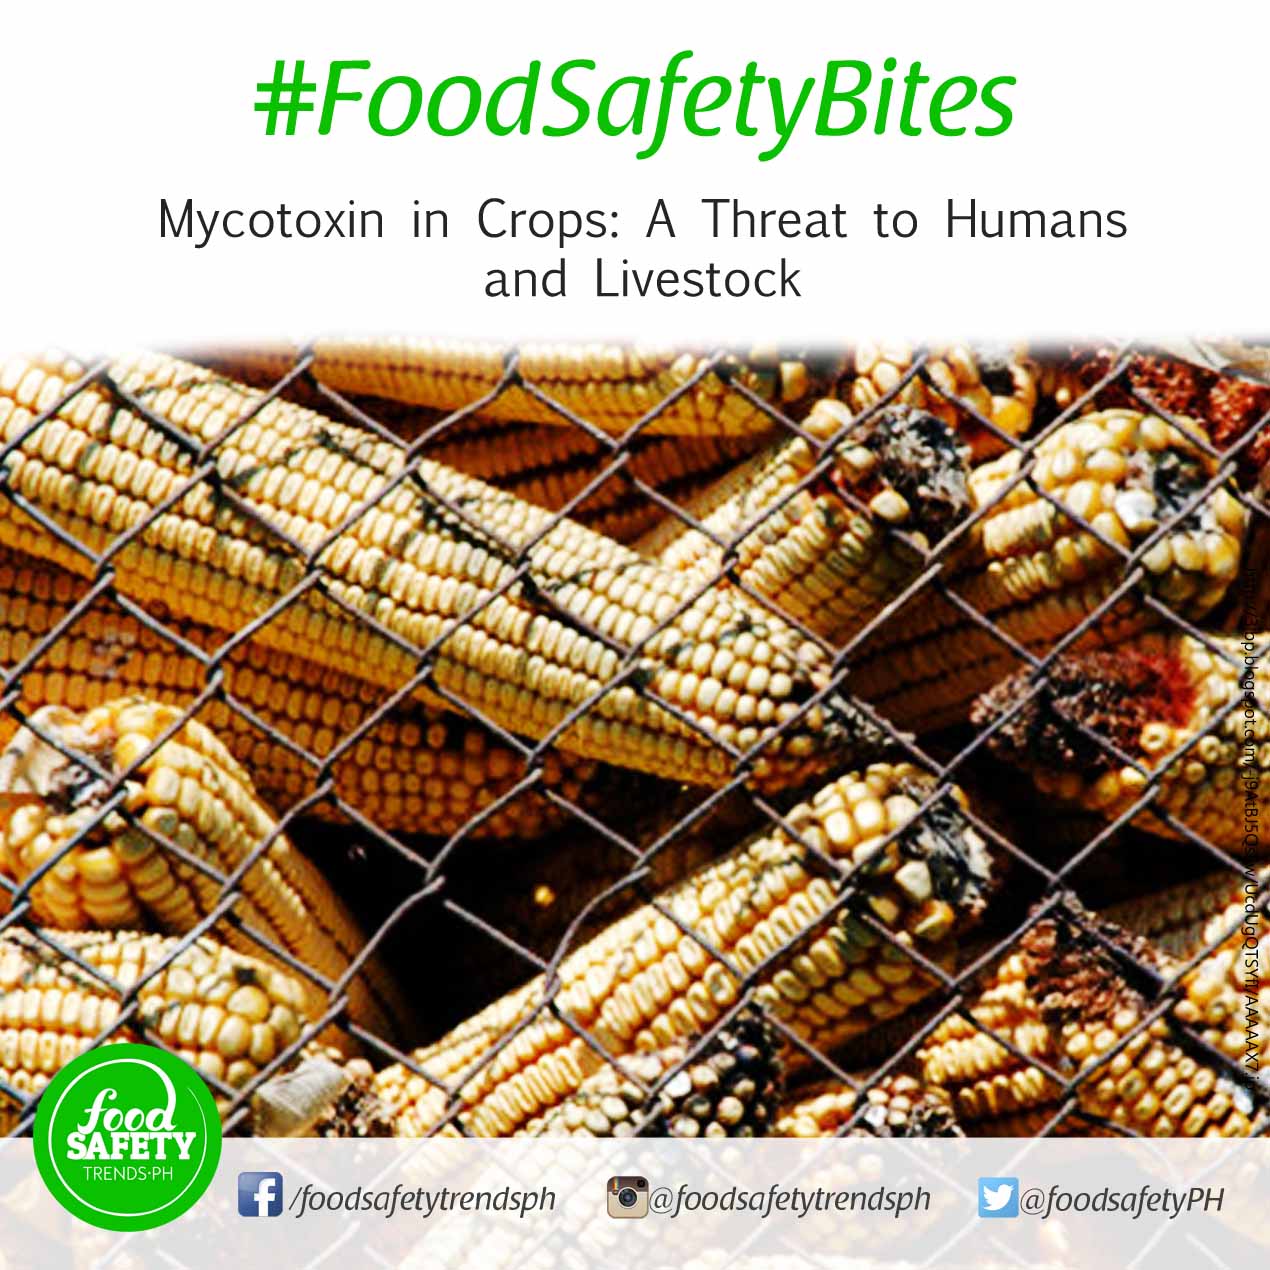 Mycotoxin in Crops: A Threat to Humans and Livestock